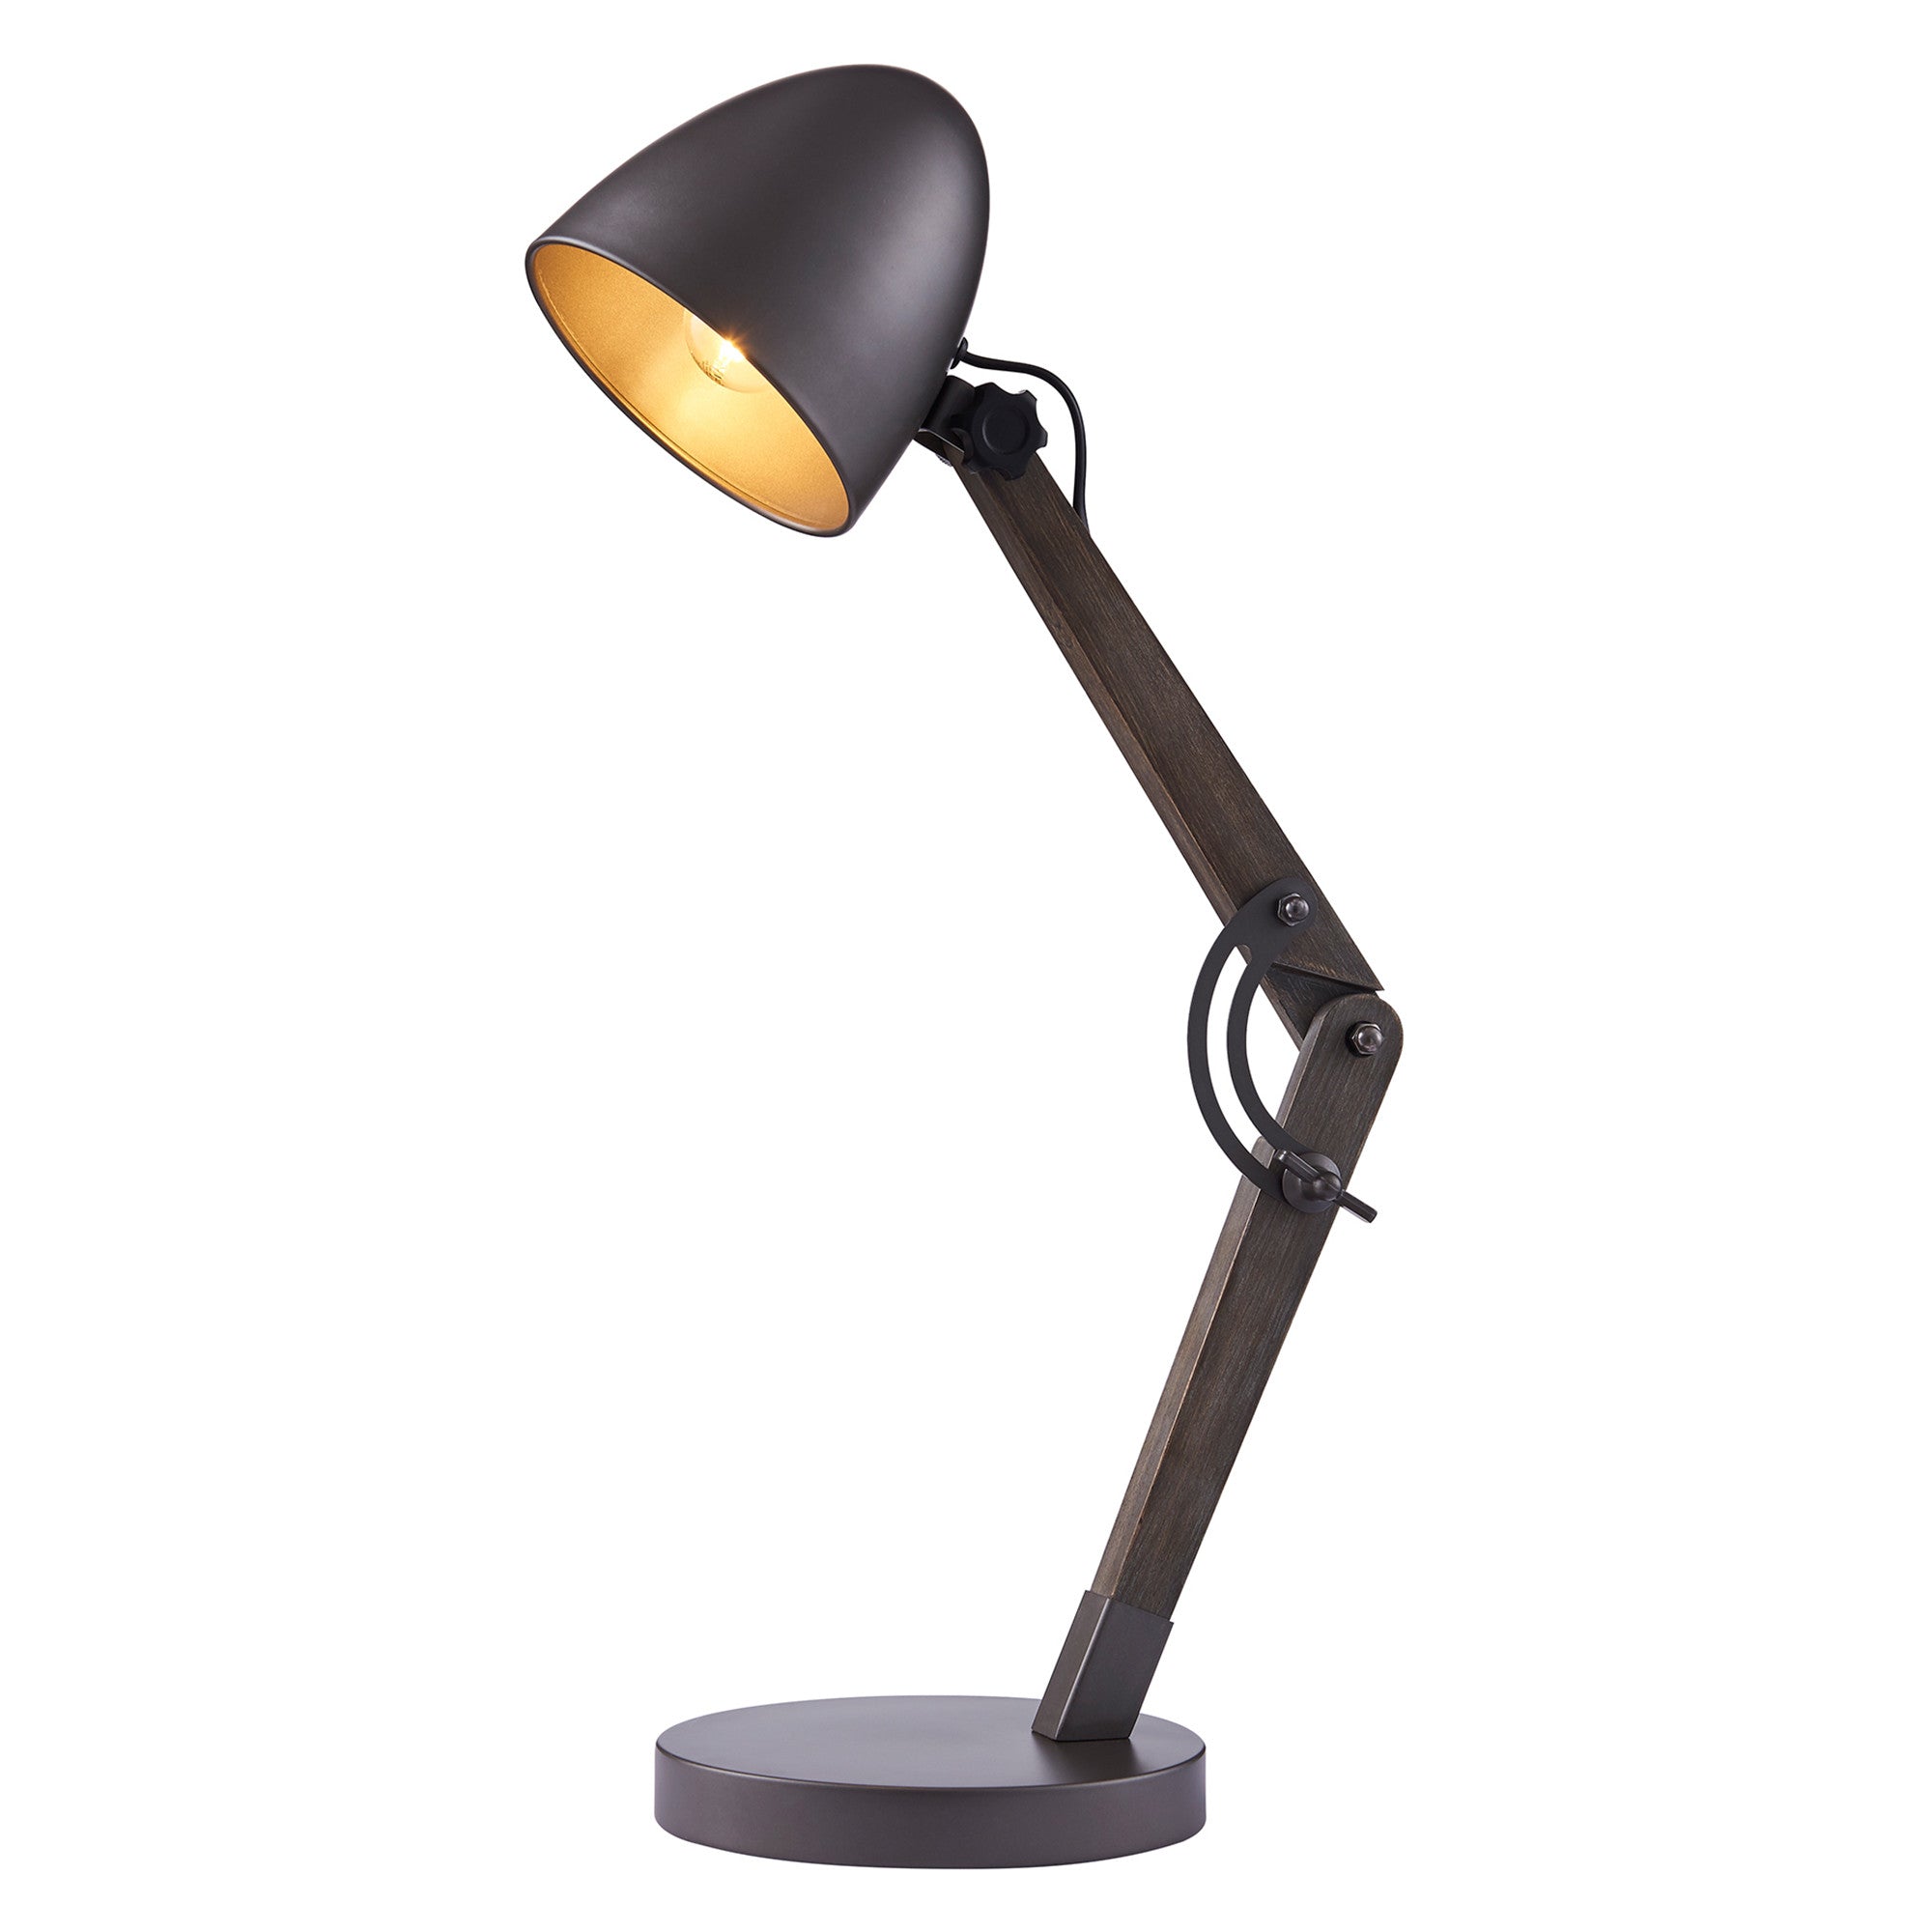 Teamson Home Lexi Modern Reading Table Lamp with Black Shade and Brushed Steel Finish